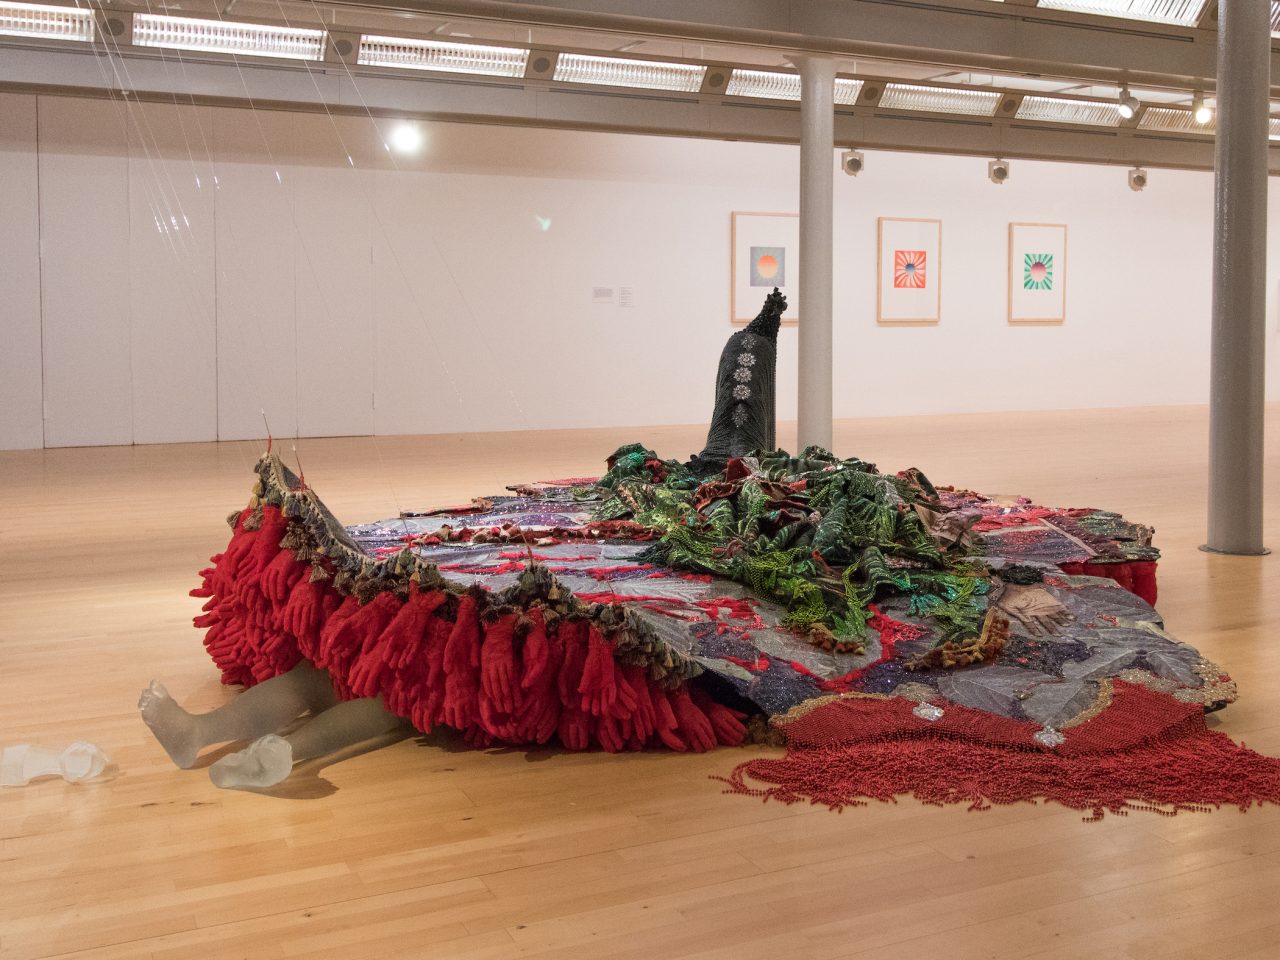 A platform made up of purple, green and red fabric and beads. Underneath are stacked red gloves, lined with tassles. Coming from underneath are a persons legs lying down with their shoes coming off, the legs and shoes are made out of frosted glass.